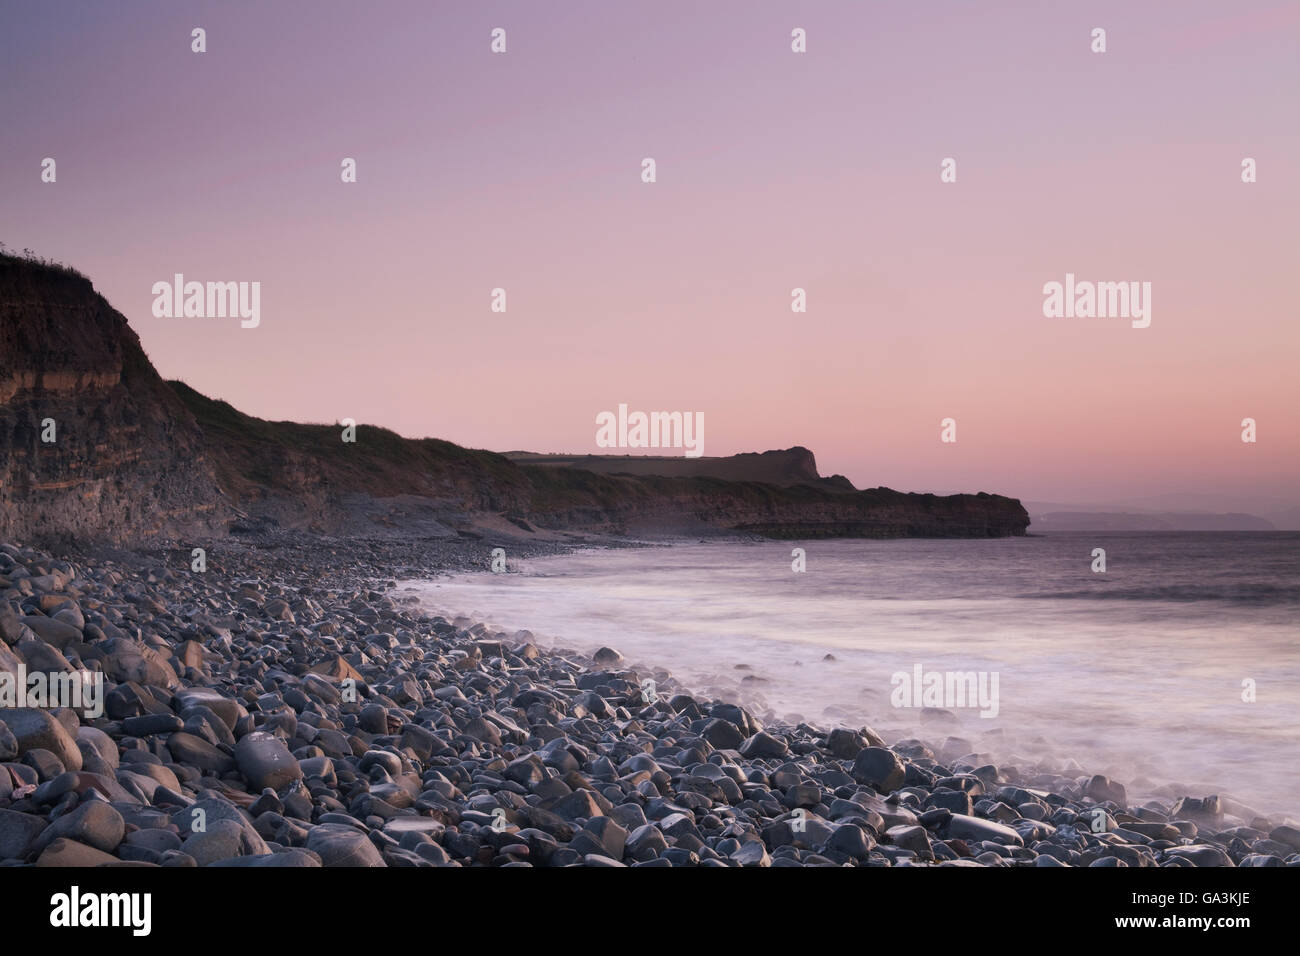 Kilve Beach after sunset, with waves washing over the loose rocks, Somerset, England, United Kingdom, Europe Stock Photo